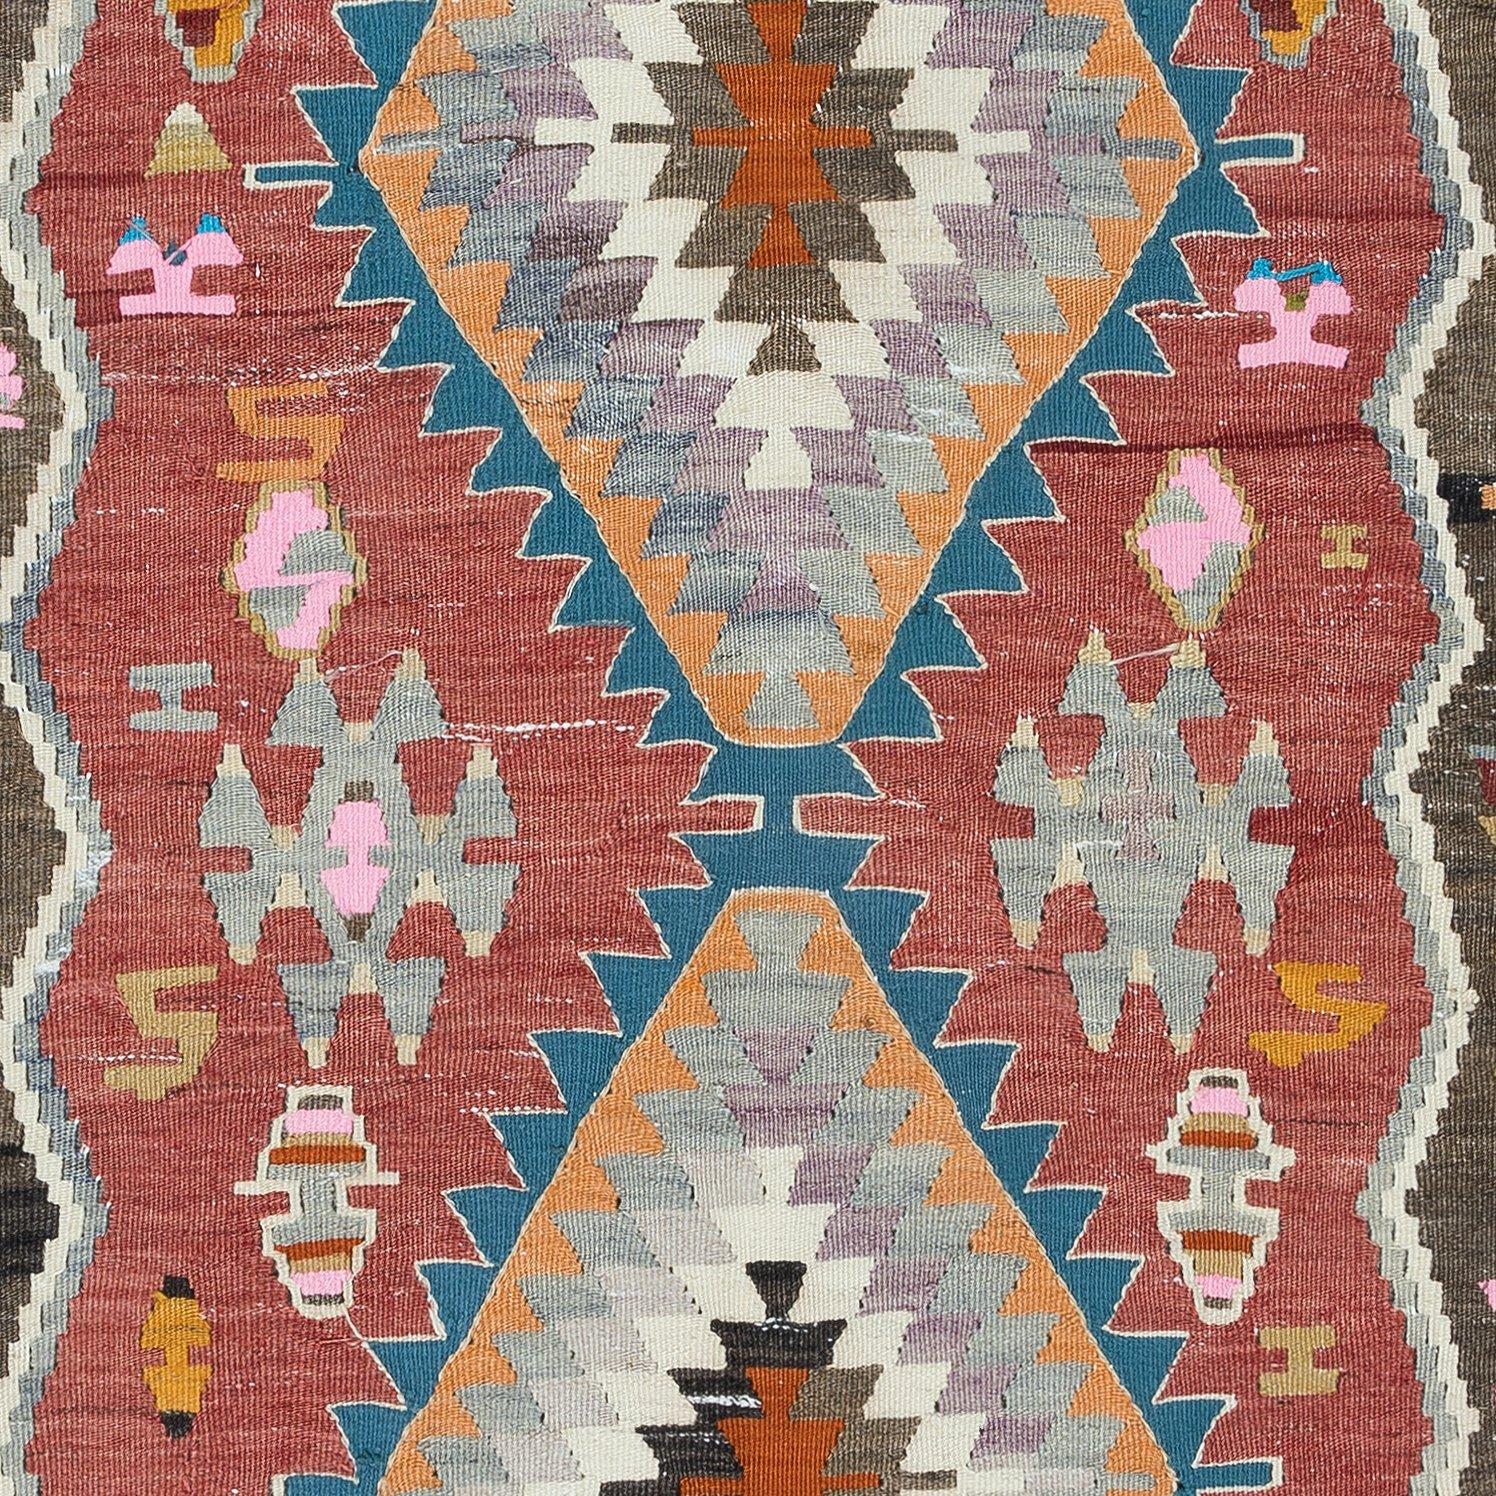 Hand-Woven 2.7x4.8 Ft Vintage Sweden Scandinavian Kilim 'Flatweave' with Geometric Patterns For Sale